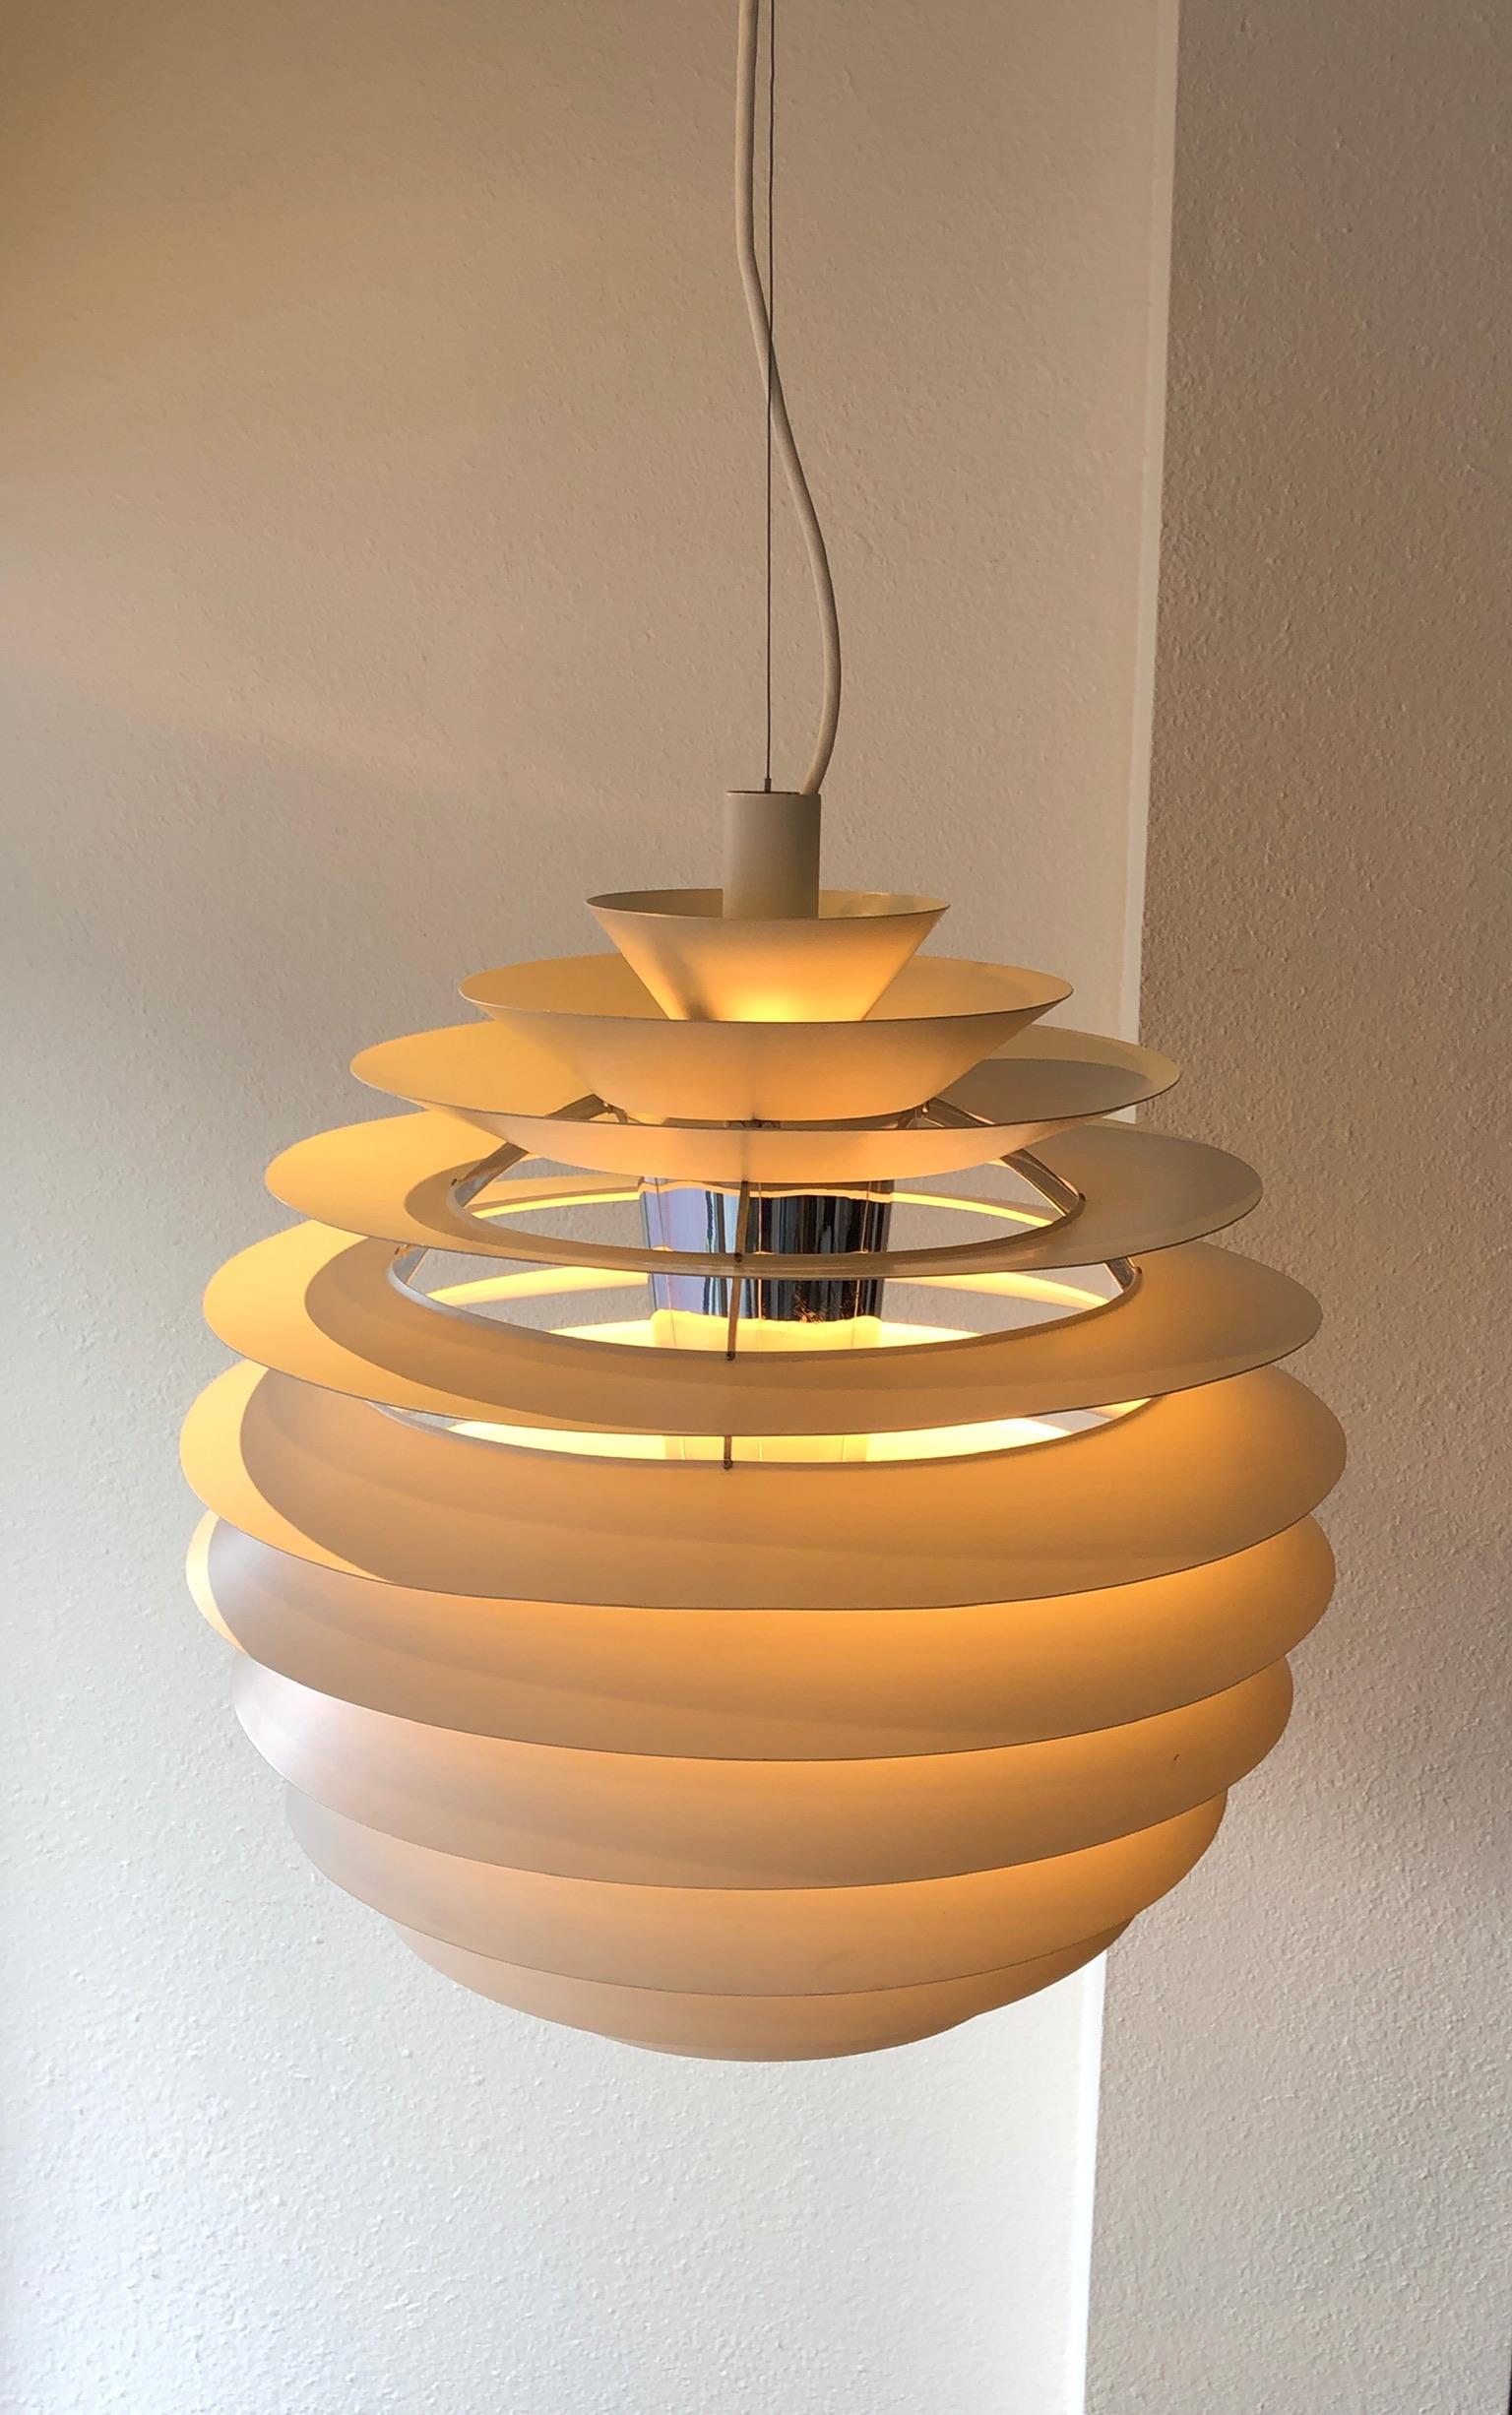 Lacquered Danish White and Chrome 1957 Pendant Lamp by Poul Henninsen for Louis Poulsen